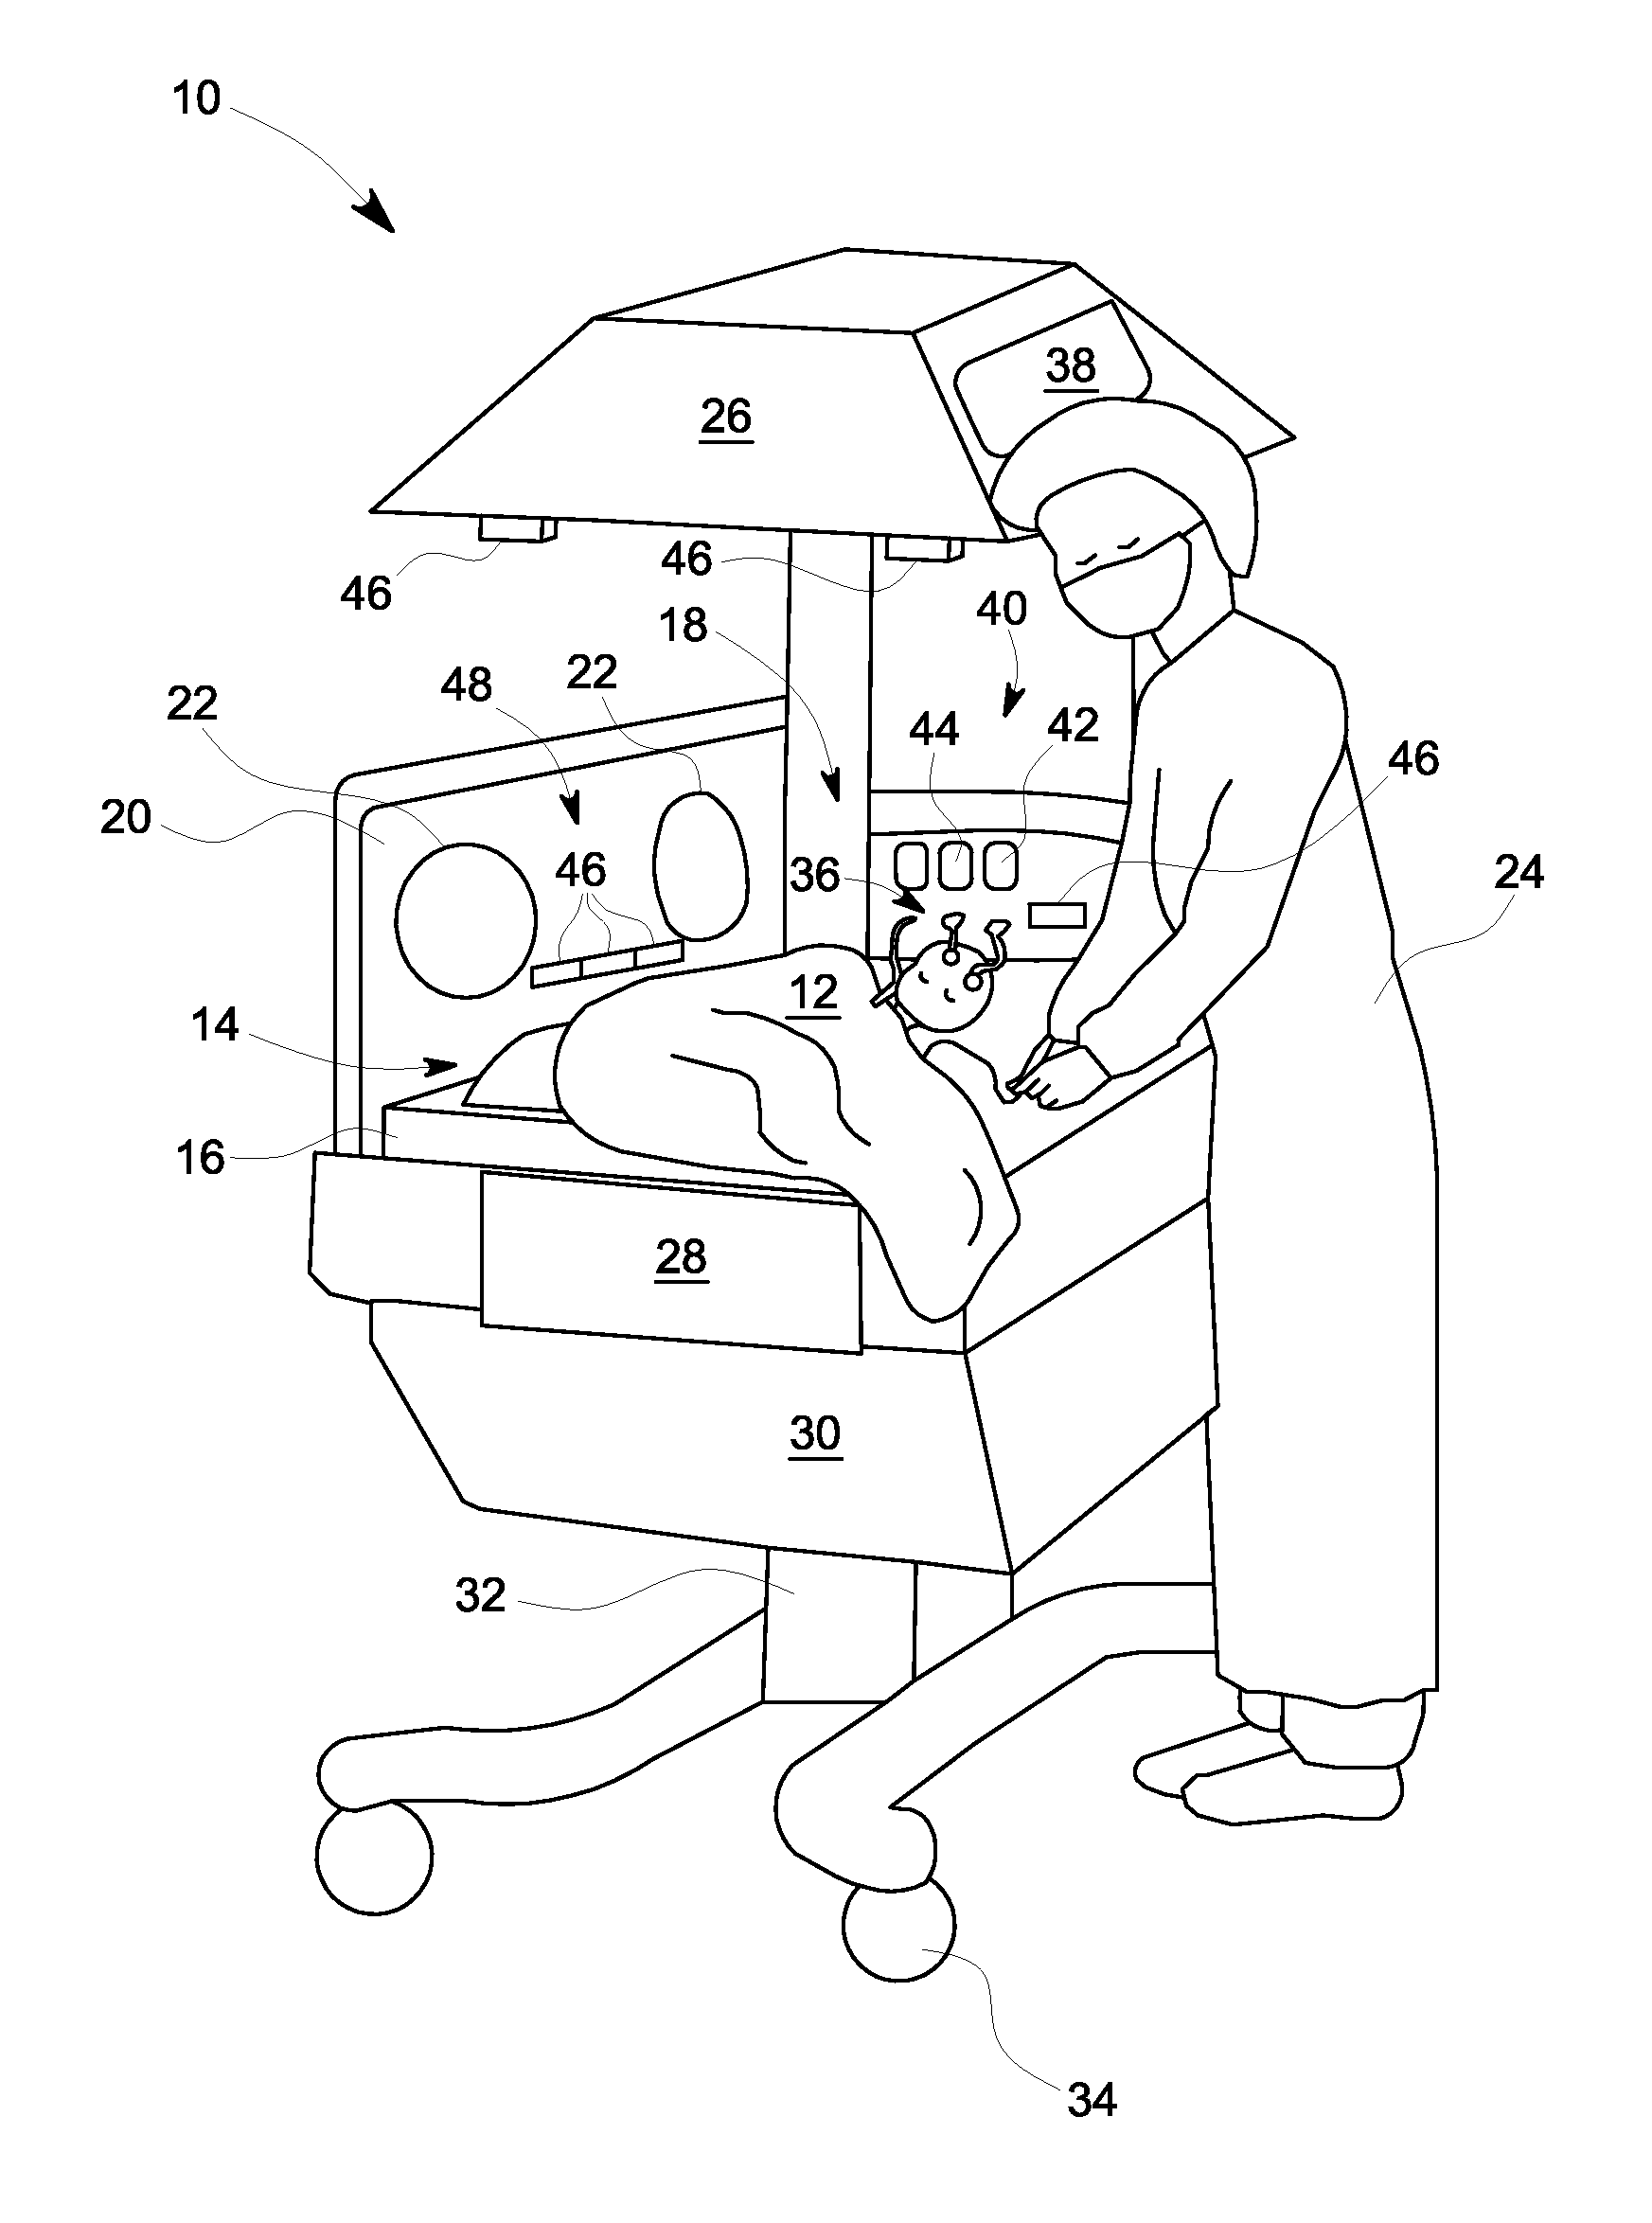 System and method of monitoring the physiological conditions of a group of infants